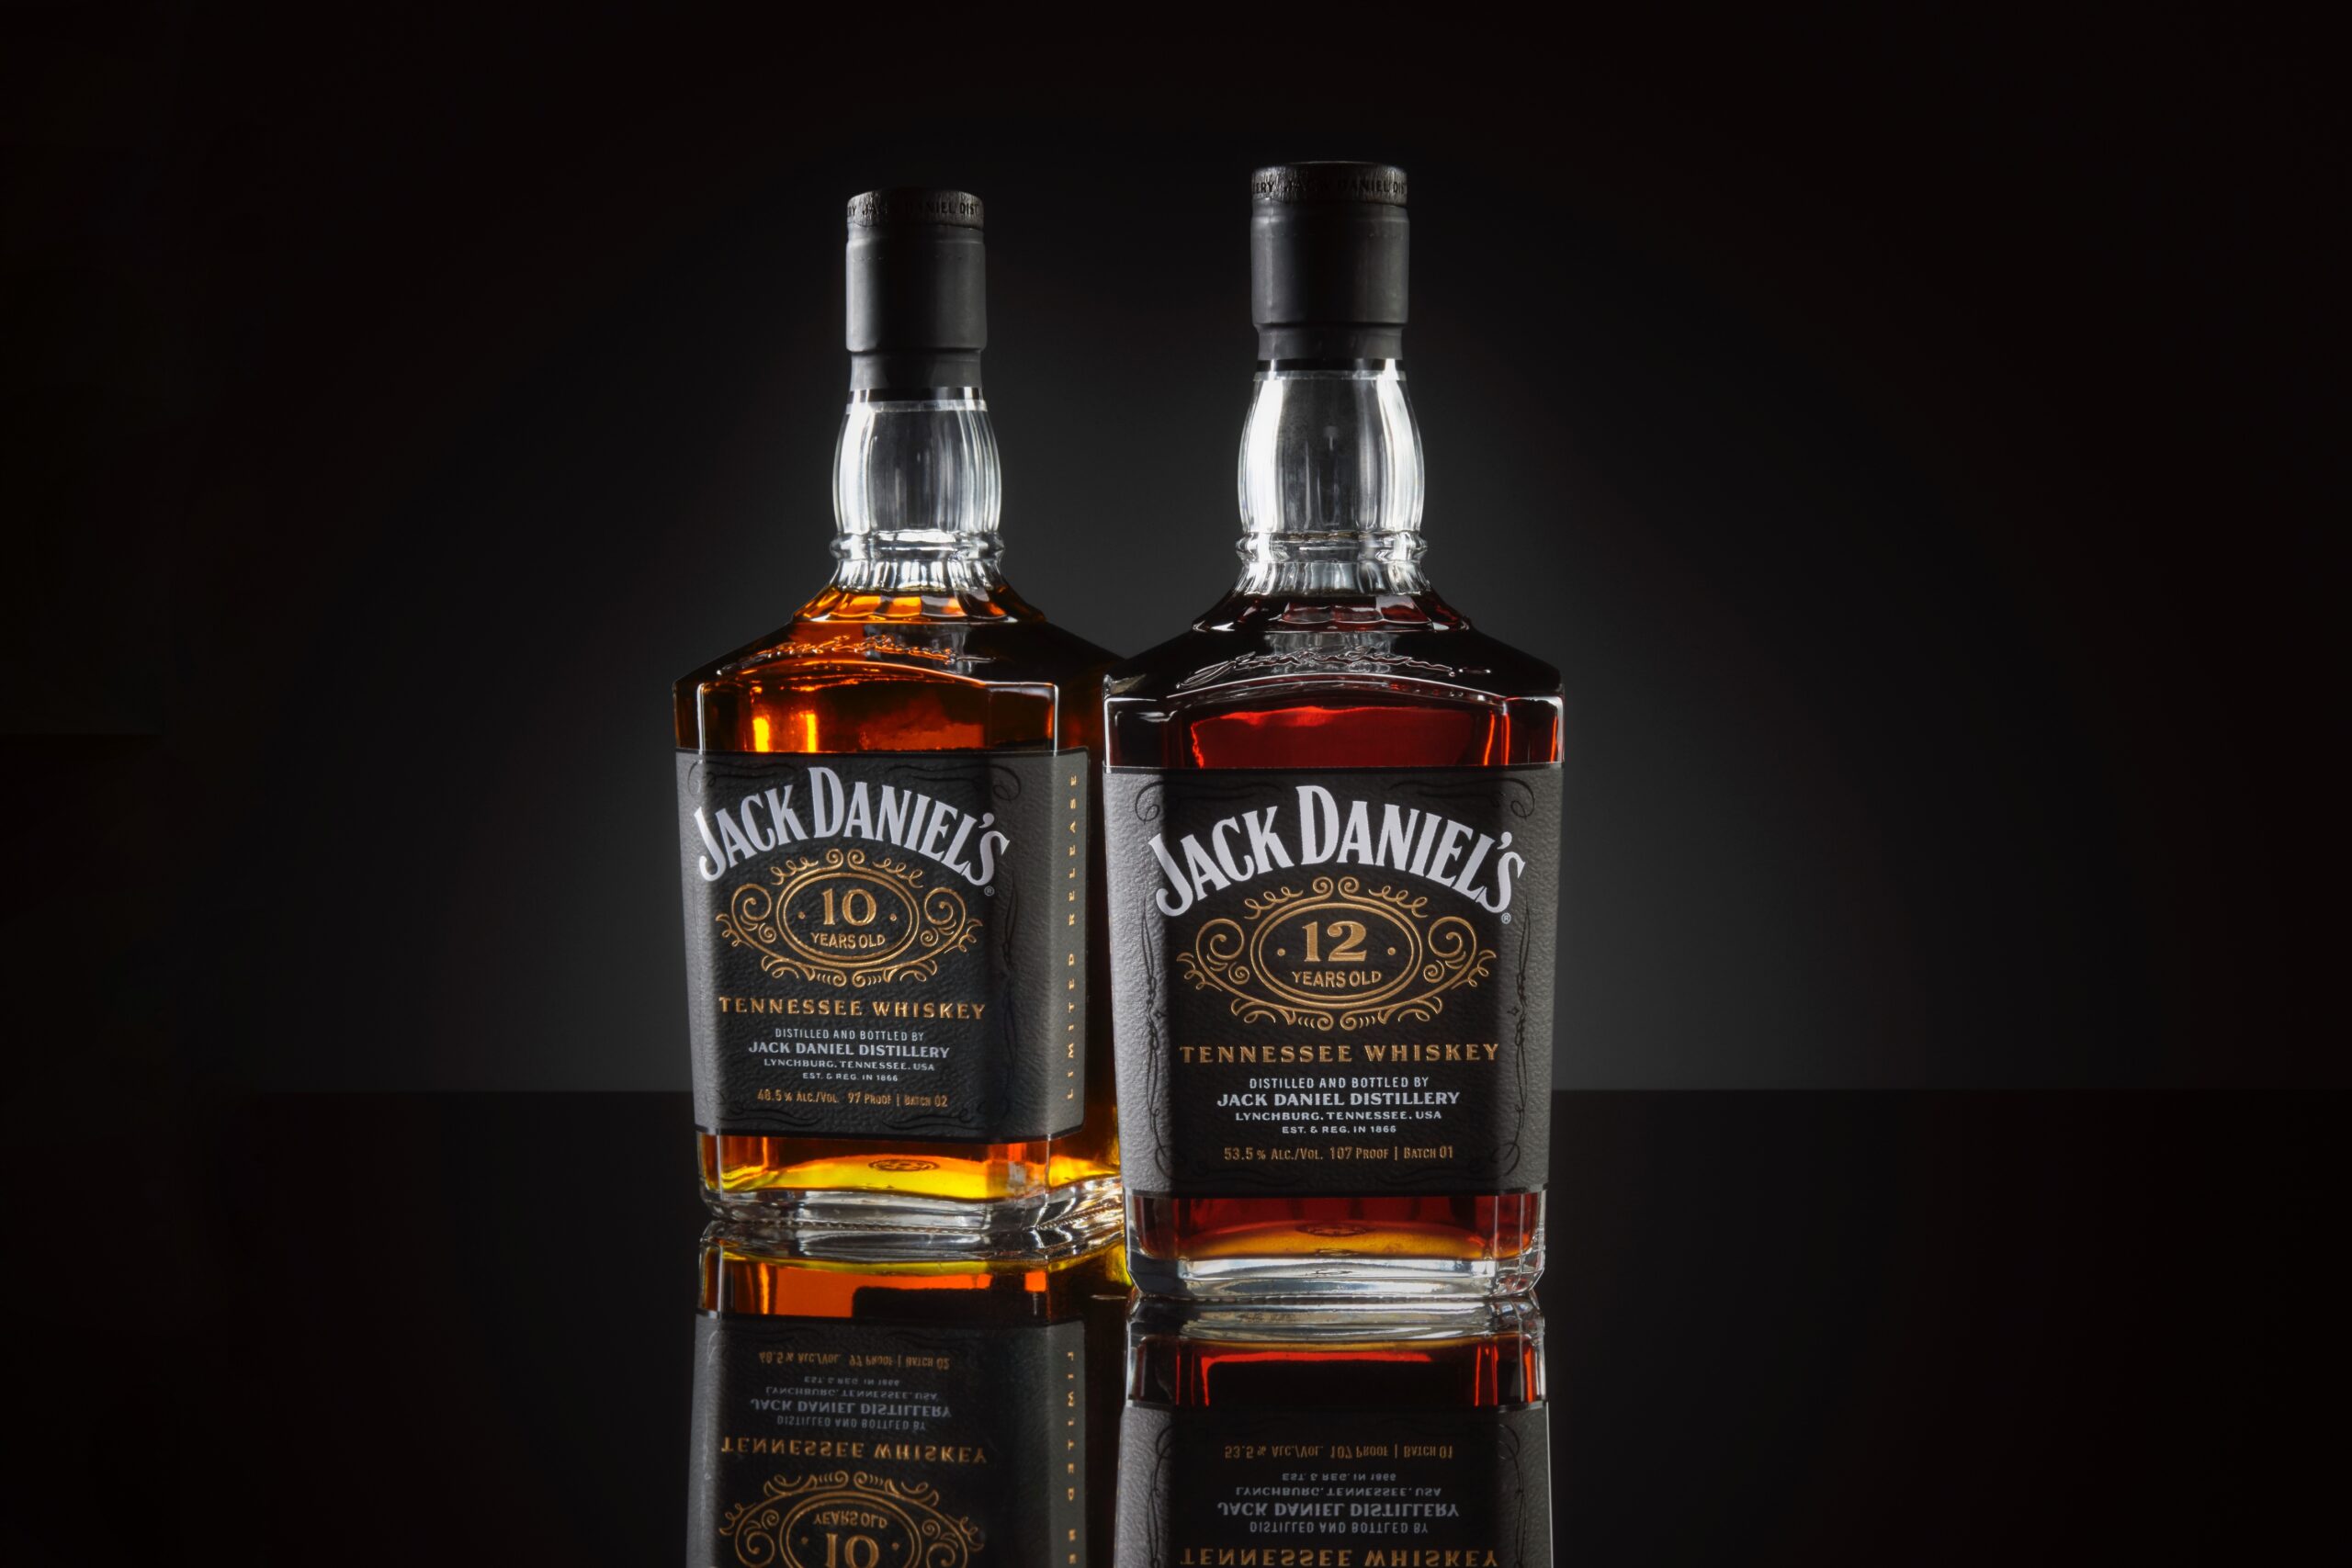 273: Jack Daniel’s Tennessee Whiskey But With a Strong Age Statement